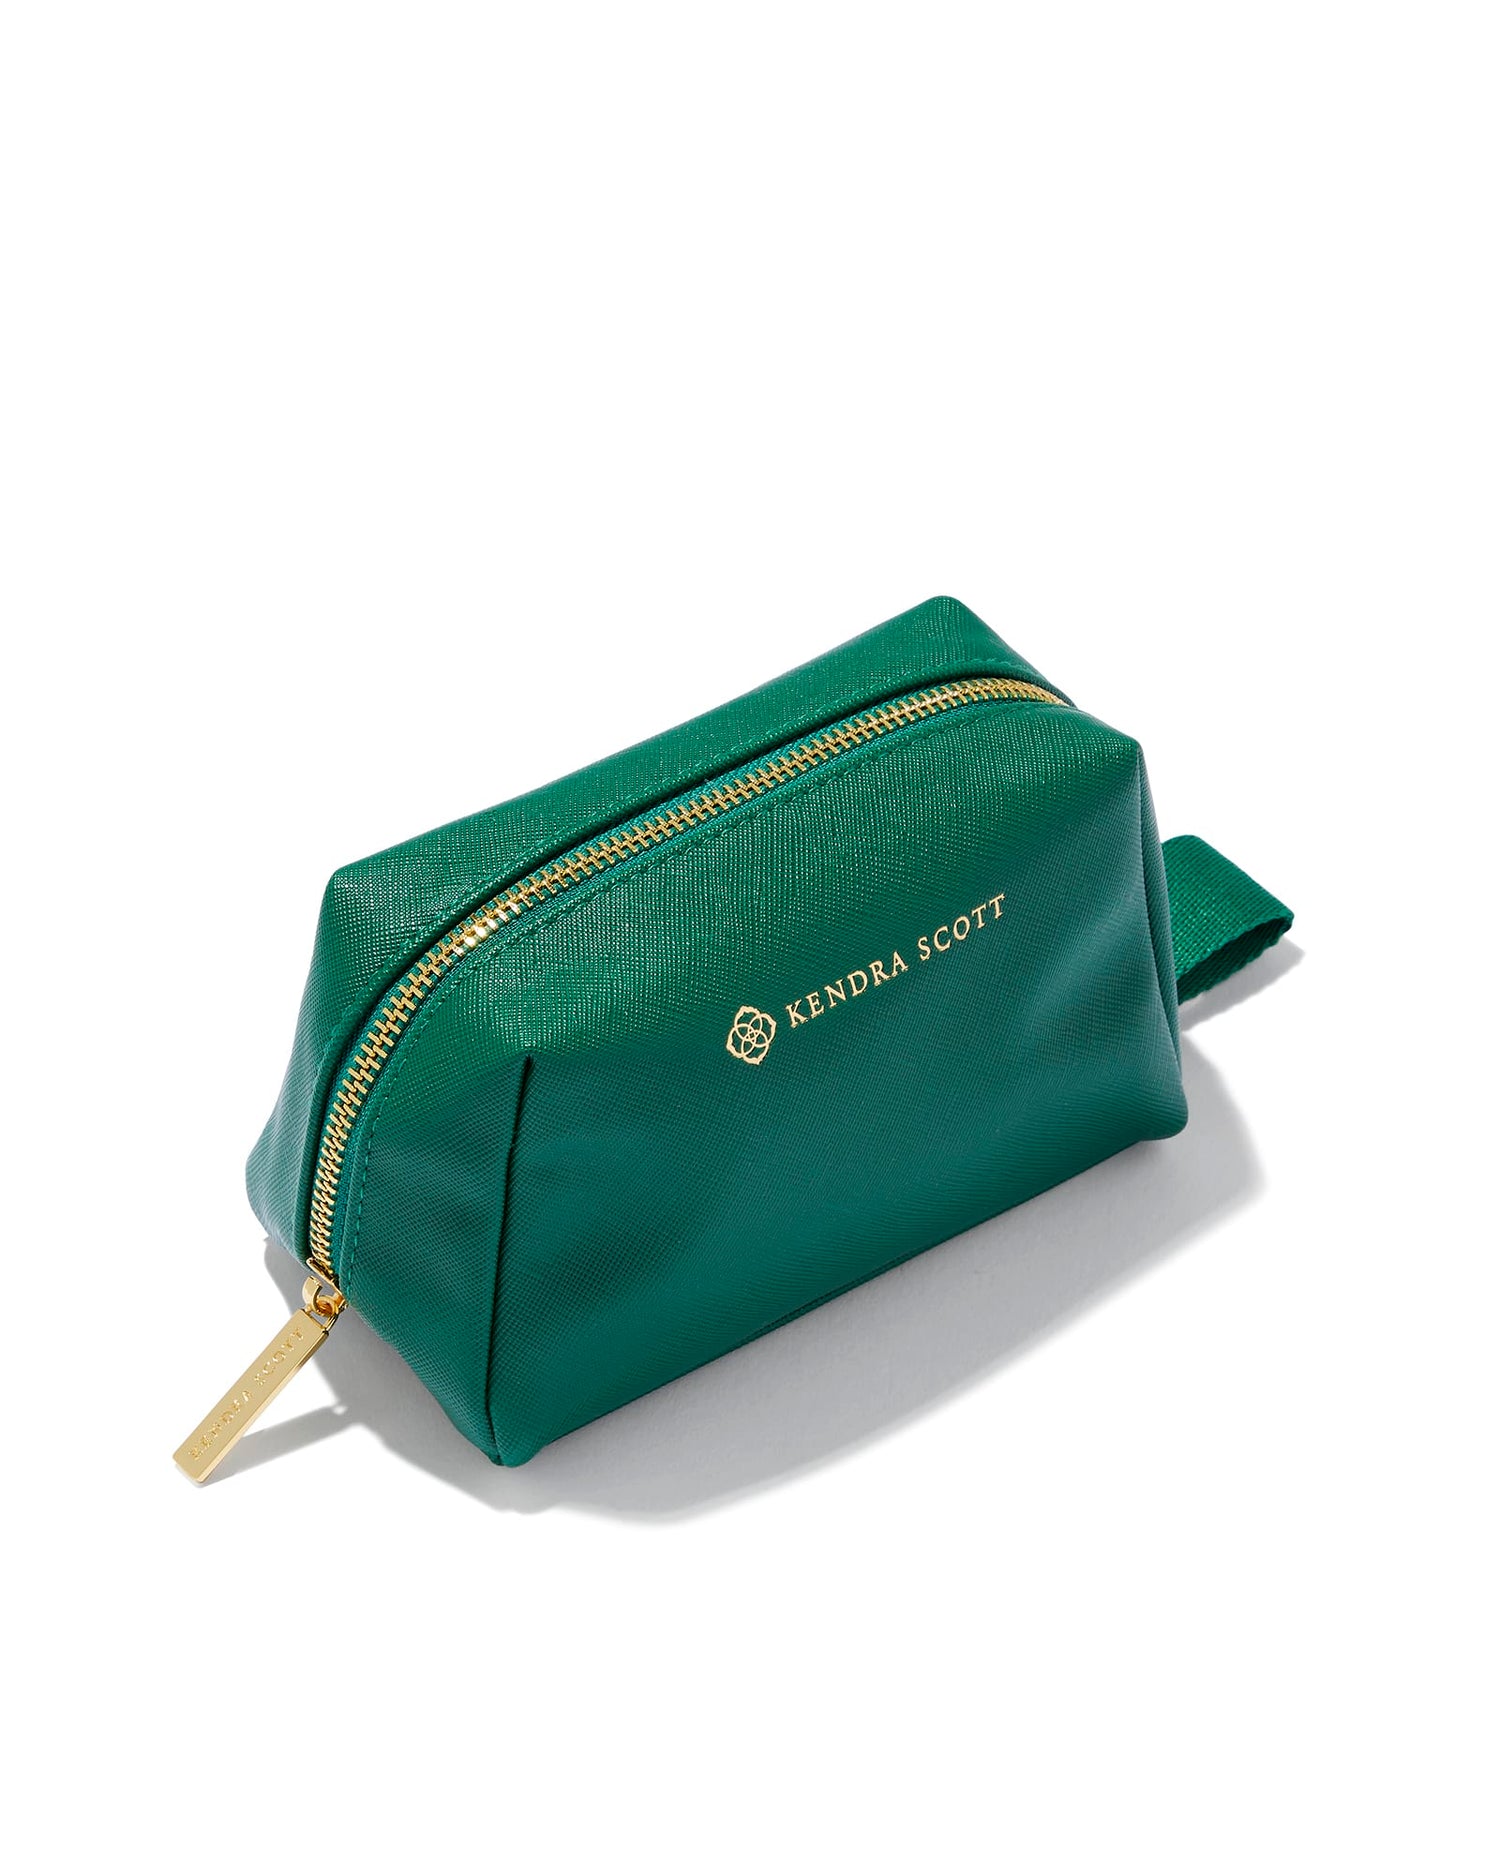 green cosmetic bag with gold zipper and Kendra Scott label MaterialPolyurethane Size6.1" (L) X 3.5" (W) X 3.7" (H)